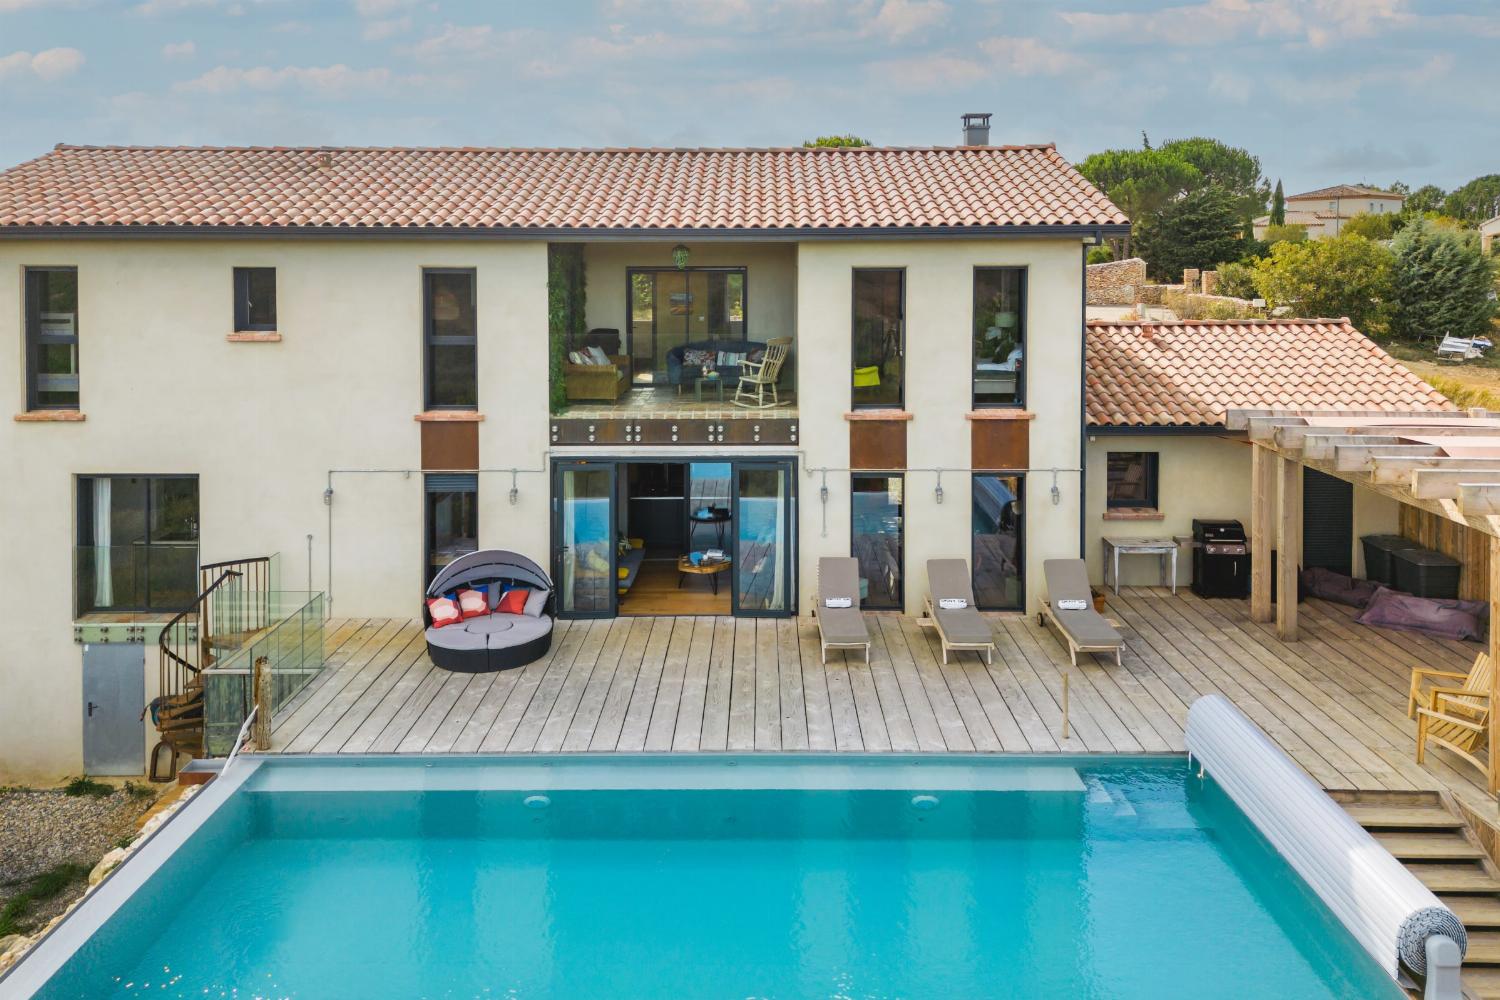 Vacation home in the South of France with private heated infinity pool